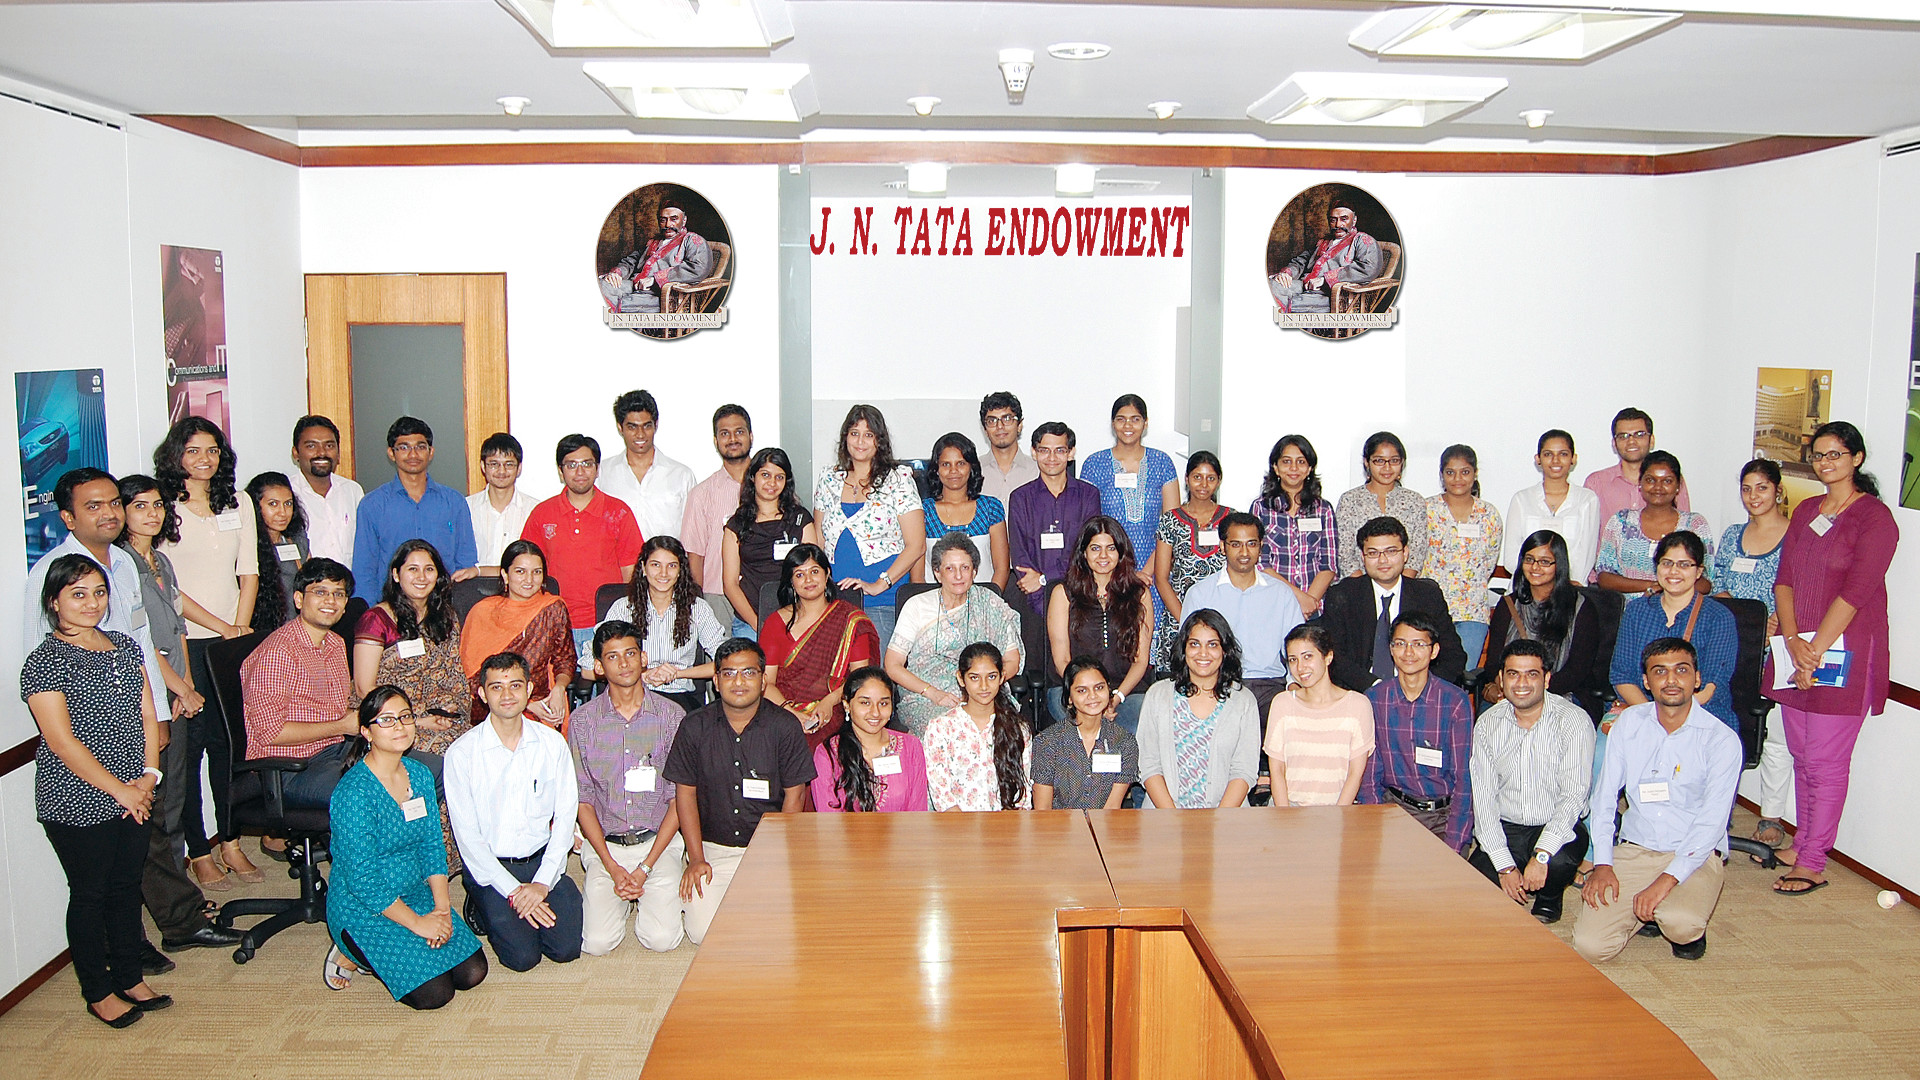 JN Tata scholars are some of the best and brightest